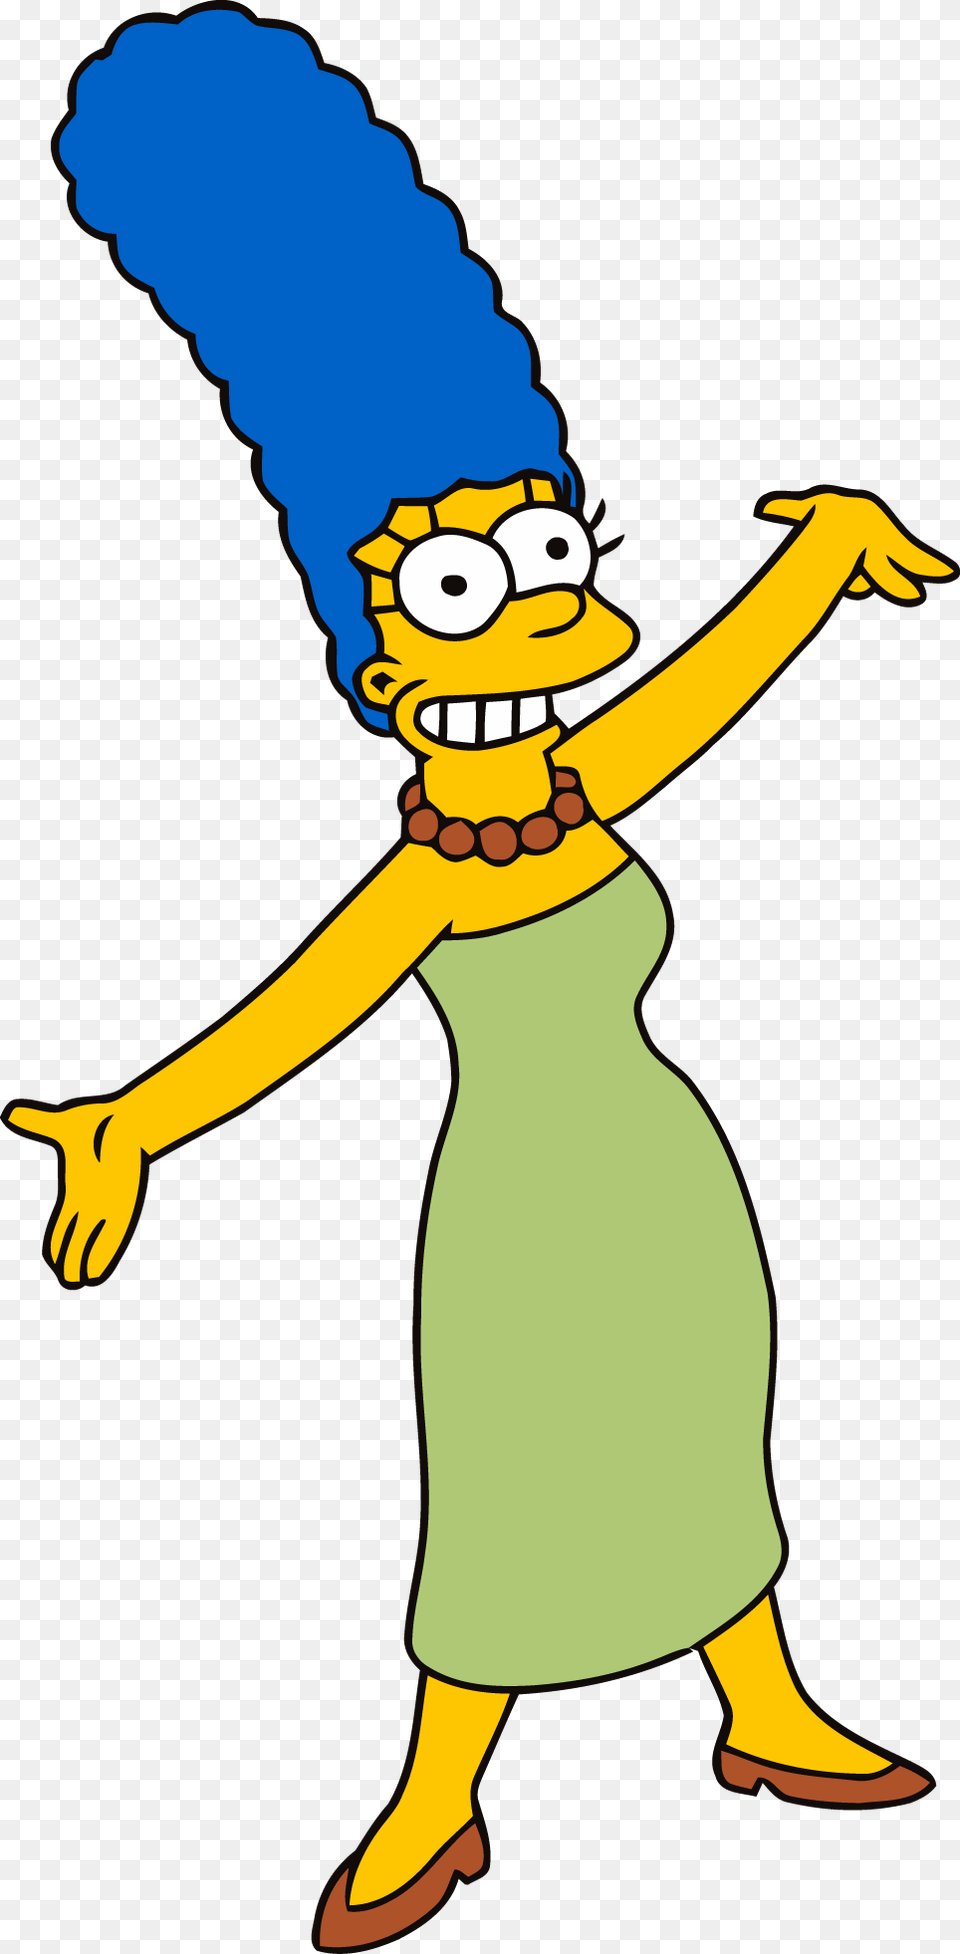 Simpsons, Cartoon, Baby, Person Png Image